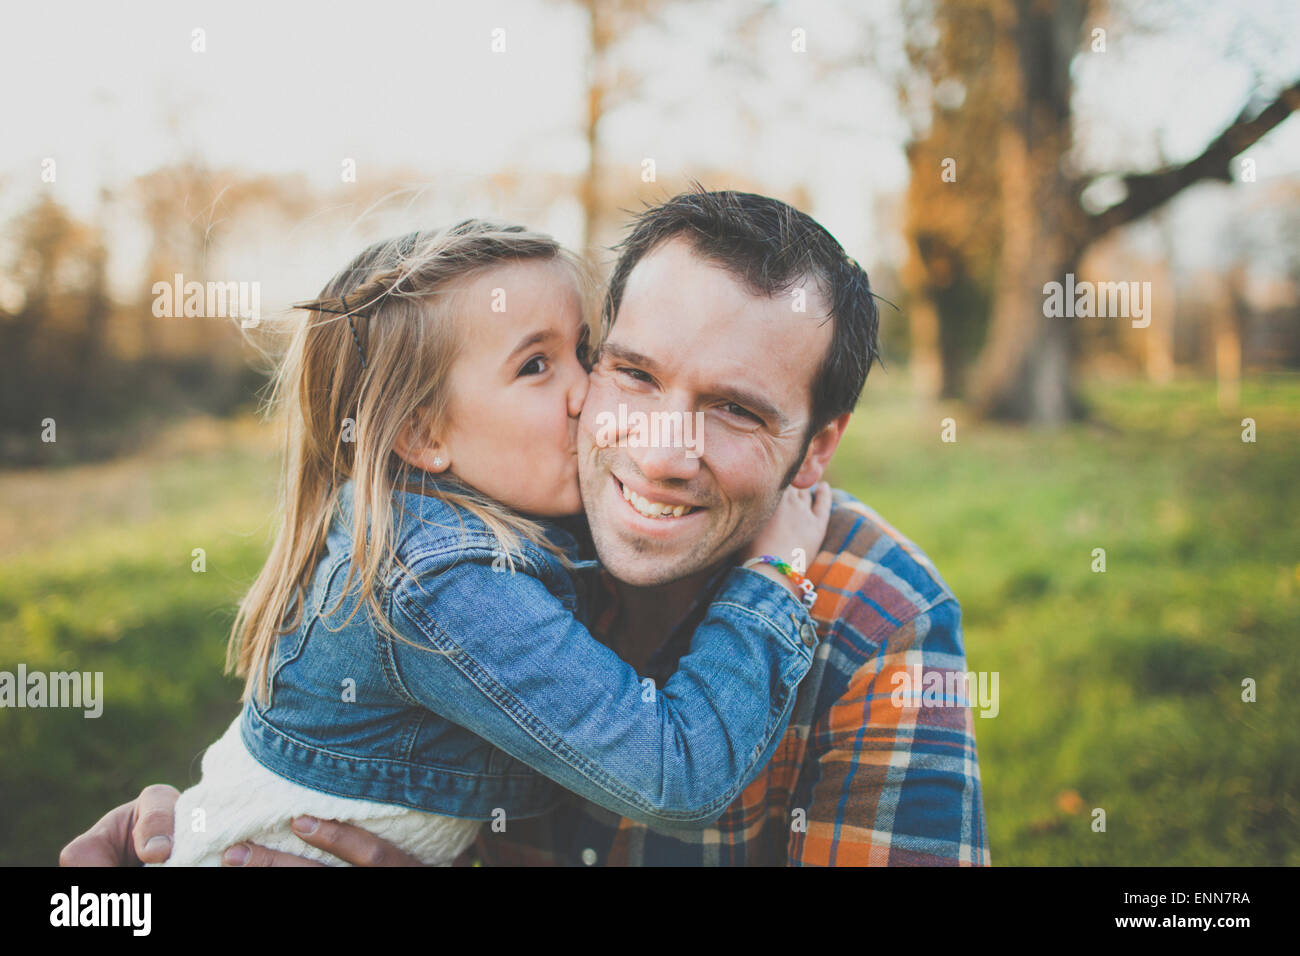 A young girl kisses her dad on the cheek. Stock Photo